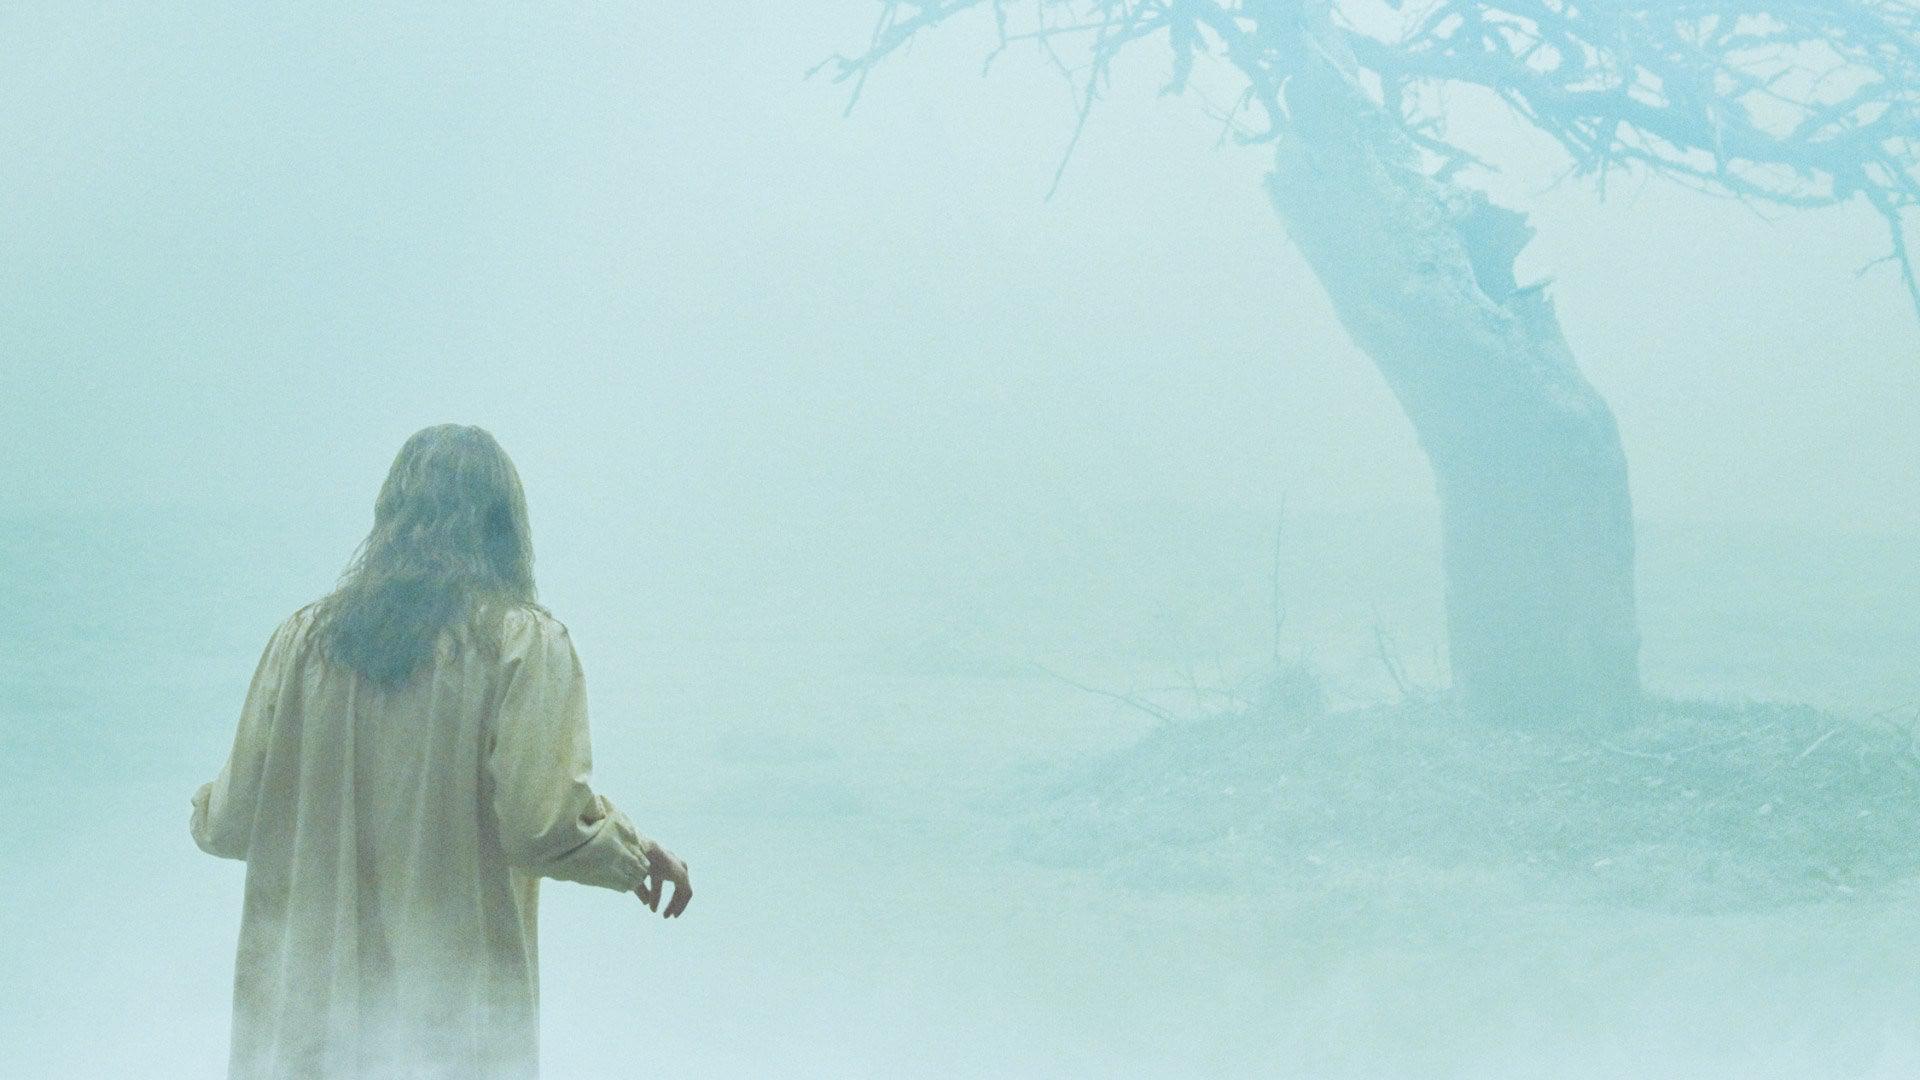 Backdrop Image for The Exorcism of Emily Rose